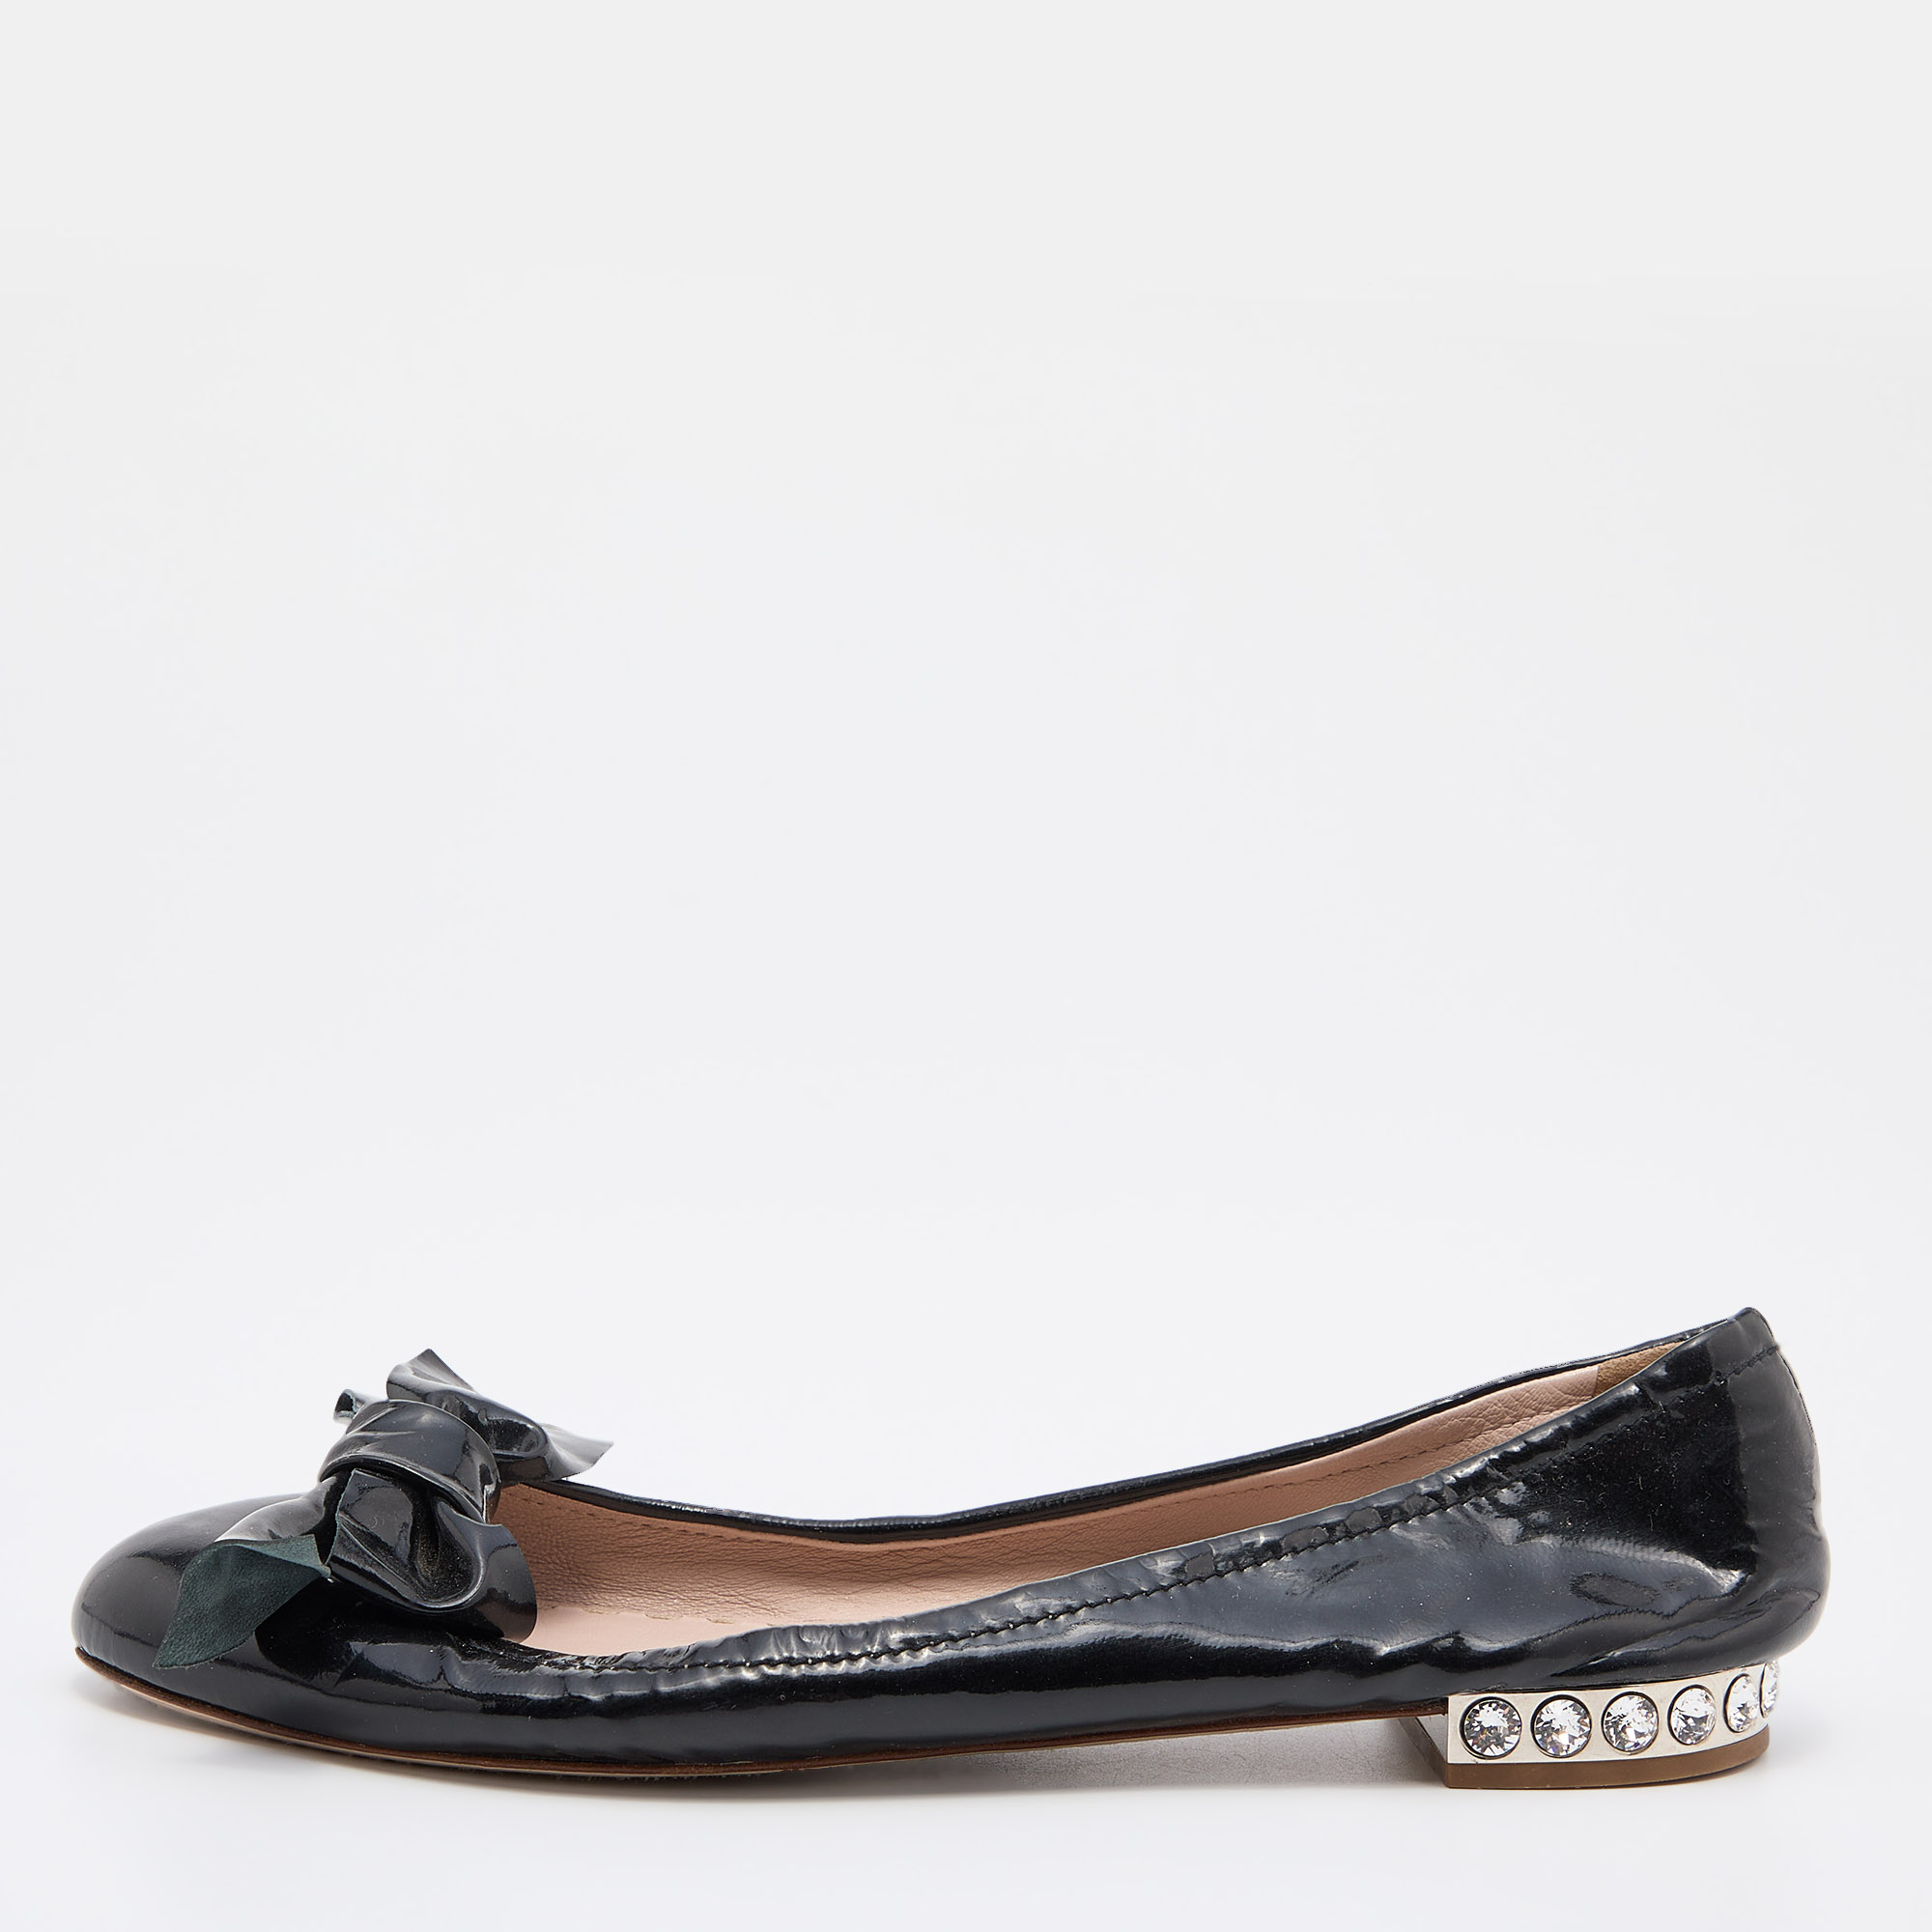 Pre-owned Miu Miu Black Patent Leather Crystal Embellished Bow Ballet Flats Size 38.5